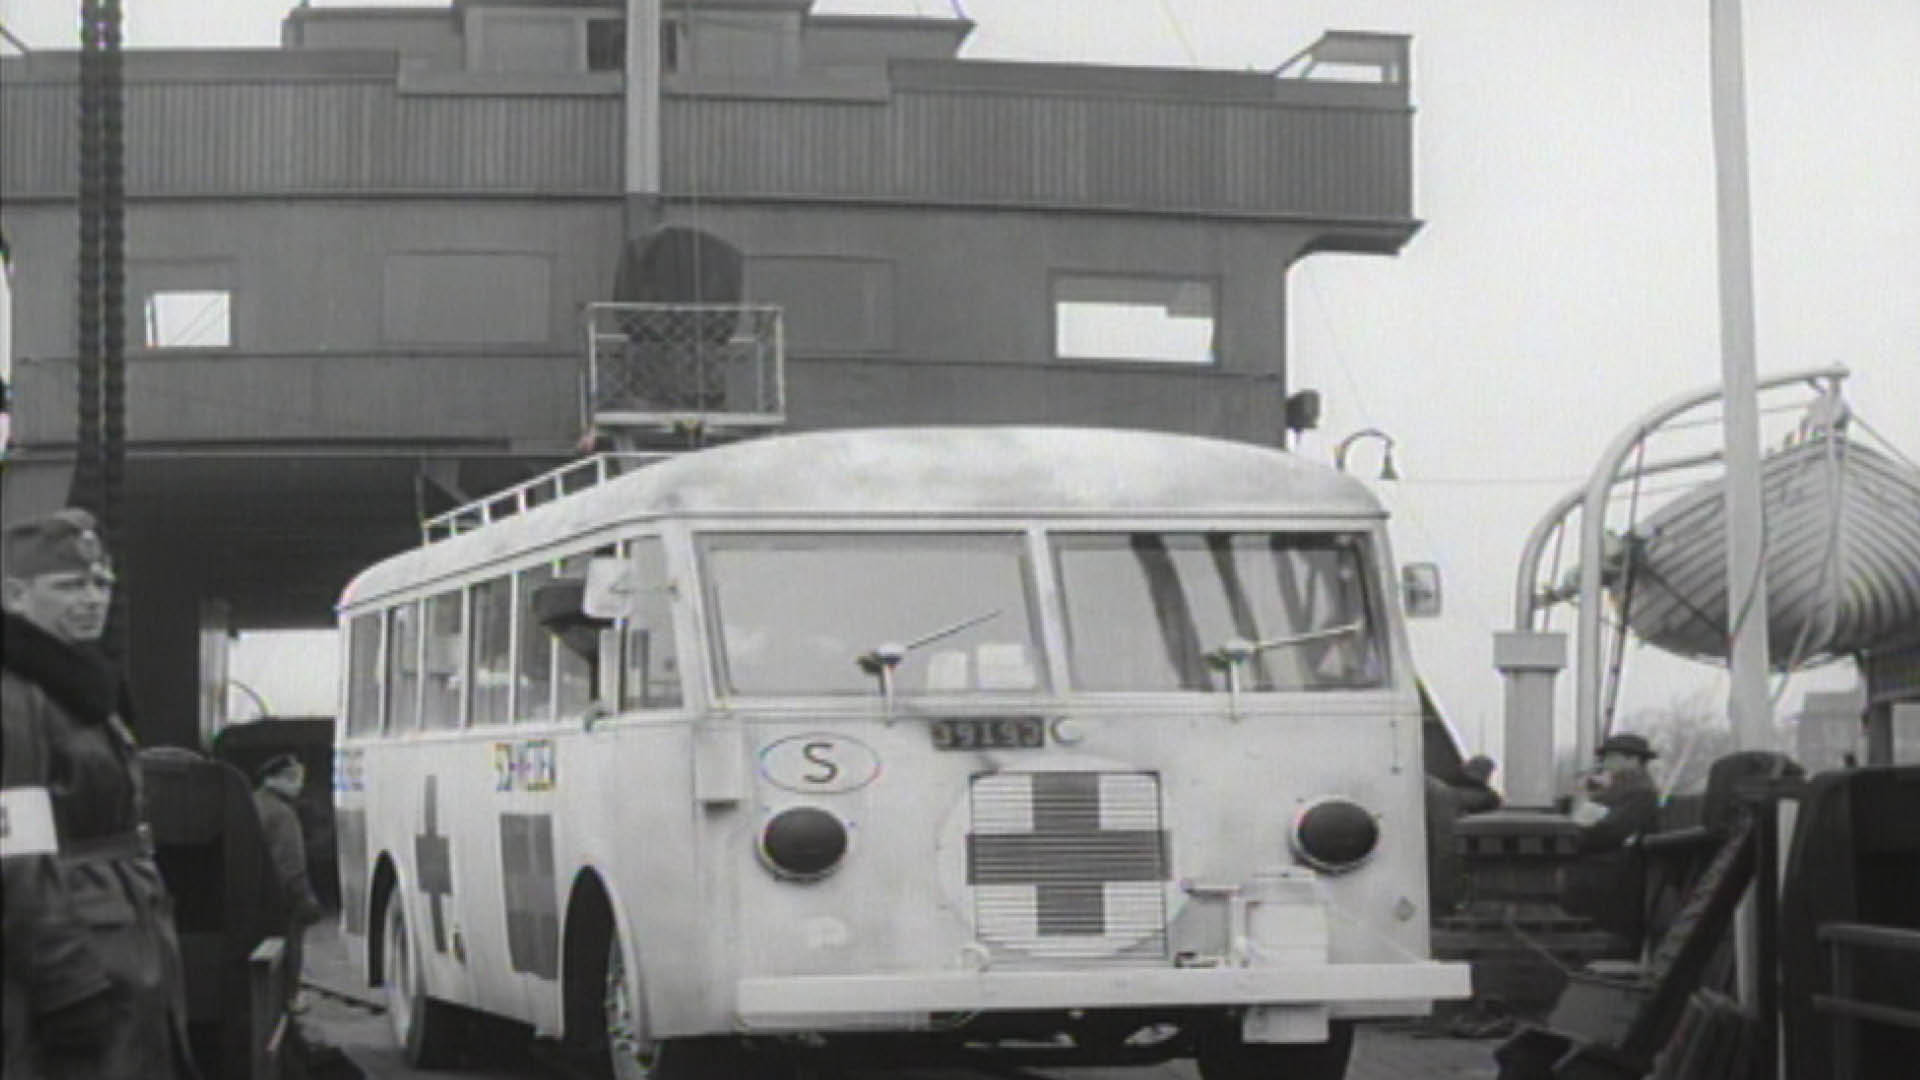 The White Buses in Malmö from Nils Jerring’s documentary short